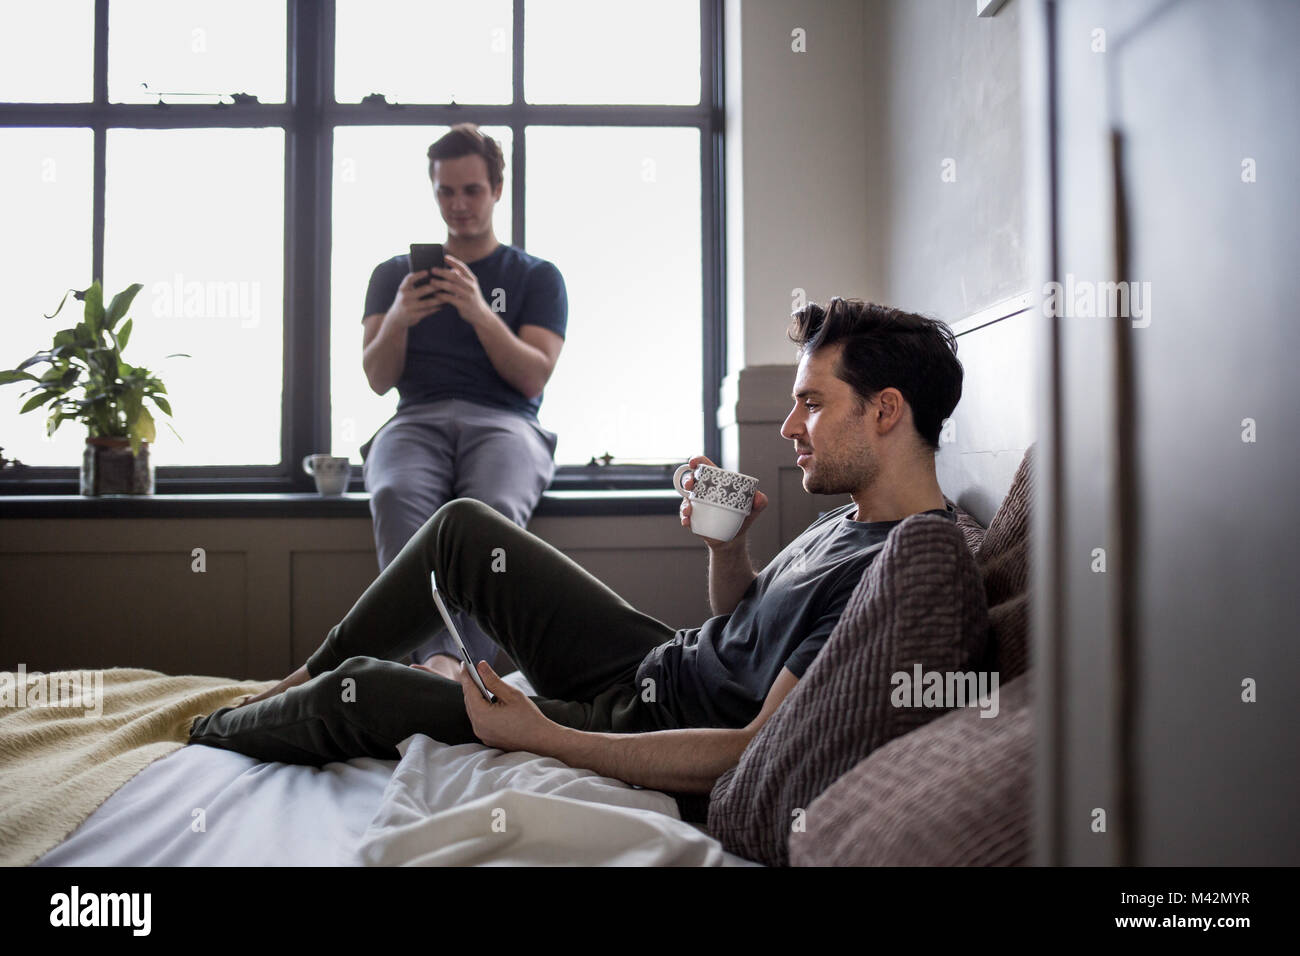 Young male couple on personal devices Stock Photo